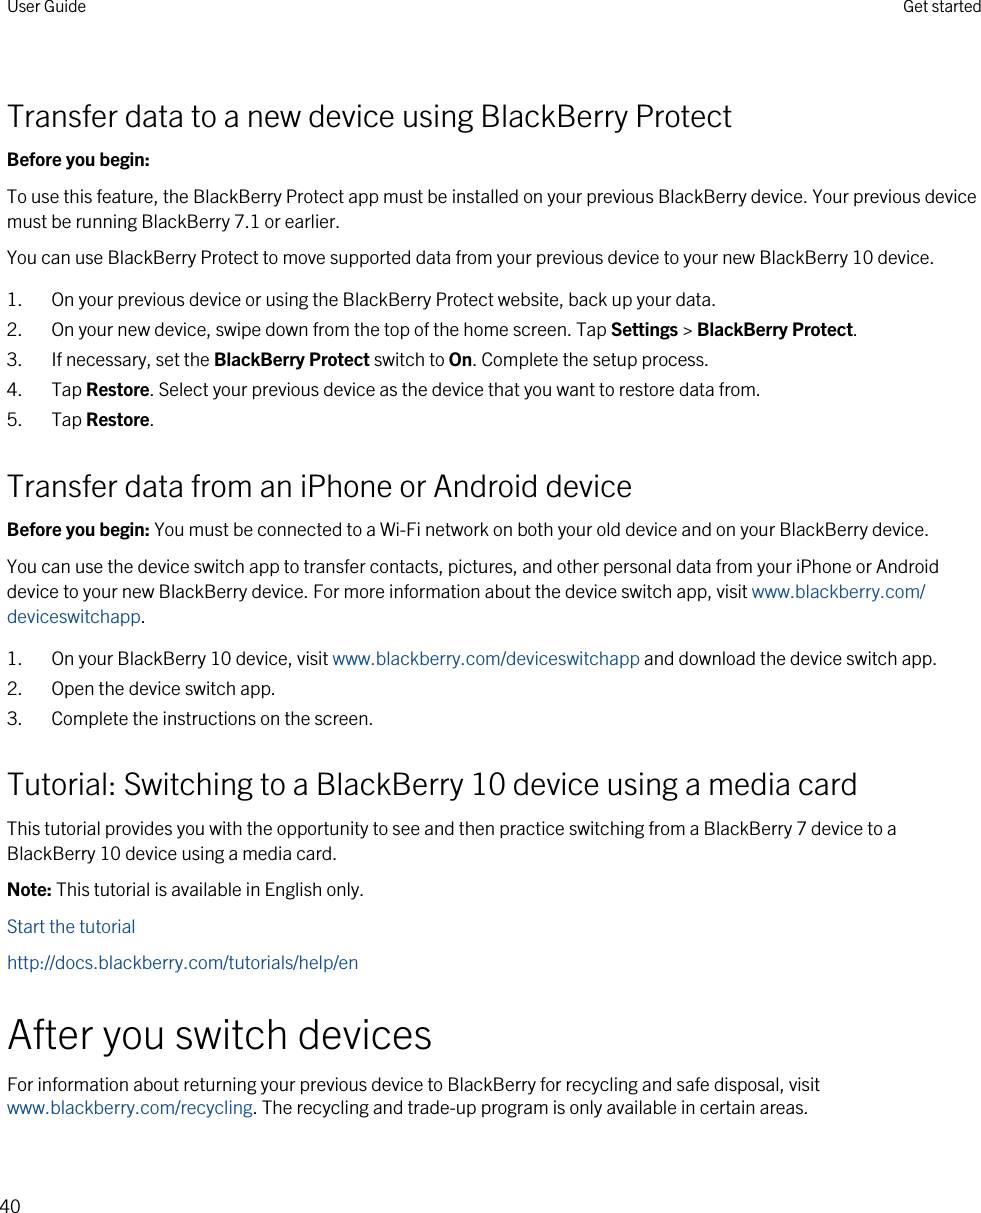 Transfer data to a new device using BlackBerry ProtectBefore you begin: To use this feature, the BlackBerry Protect app must be installed on your previous BlackBerry device. Your previous device must be running BlackBerry 7.1 or earlier.You can use BlackBerry Protect to move supported data from your previous device to your new BlackBerry 10 device.1. On your previous device or using the BlackBerry Protect website, back up your data.2. On your new device, swipe down from the top of the home screen. Tap Settings &gt; BlackBerry Protect.3. If necessary, set the BlackBerry Protect switch to On. Complete the setup process.4. Tap Restore. Select your previous device as the device that you want to restore data from.5. Tap Restore.Transfer data from an iPhone or Android deviceBefore you begin: You must be connected to a Wi-Fi network on both your old device and on your BlackBerry device.You can use the device switch app to transfer contacts, pictures, and other personal data from your iPhone or Android device to your new BlackBerry device. For more information about the device switch app, visit www.blackberry.com/deviceswitchapp.1. On your BlackBerry 10 device, visit www.blackberry.com/deviceswitchapp and download the device switch app.2. Open the device switch app.3. Complete the instructions on the screen.Tutorial: Switching to a BlackBerry 10 device using a media cardThis tutorial provides you with the opportunity to see and then practice switching from a BlackBerry 7 device to a BlackBerry 10 device using a media card.Note: This tutorial is available in English only.Start the tutorialhttp://docs.blackberry.com/tutorials/help/enAfter you switch devicesFor information about returning your previous device to BlackBerry for recycling and safe disposal, visit www.blackberry.com/recycling. The recycling and trade-up program is only available in certain areas.User Guide Get started40